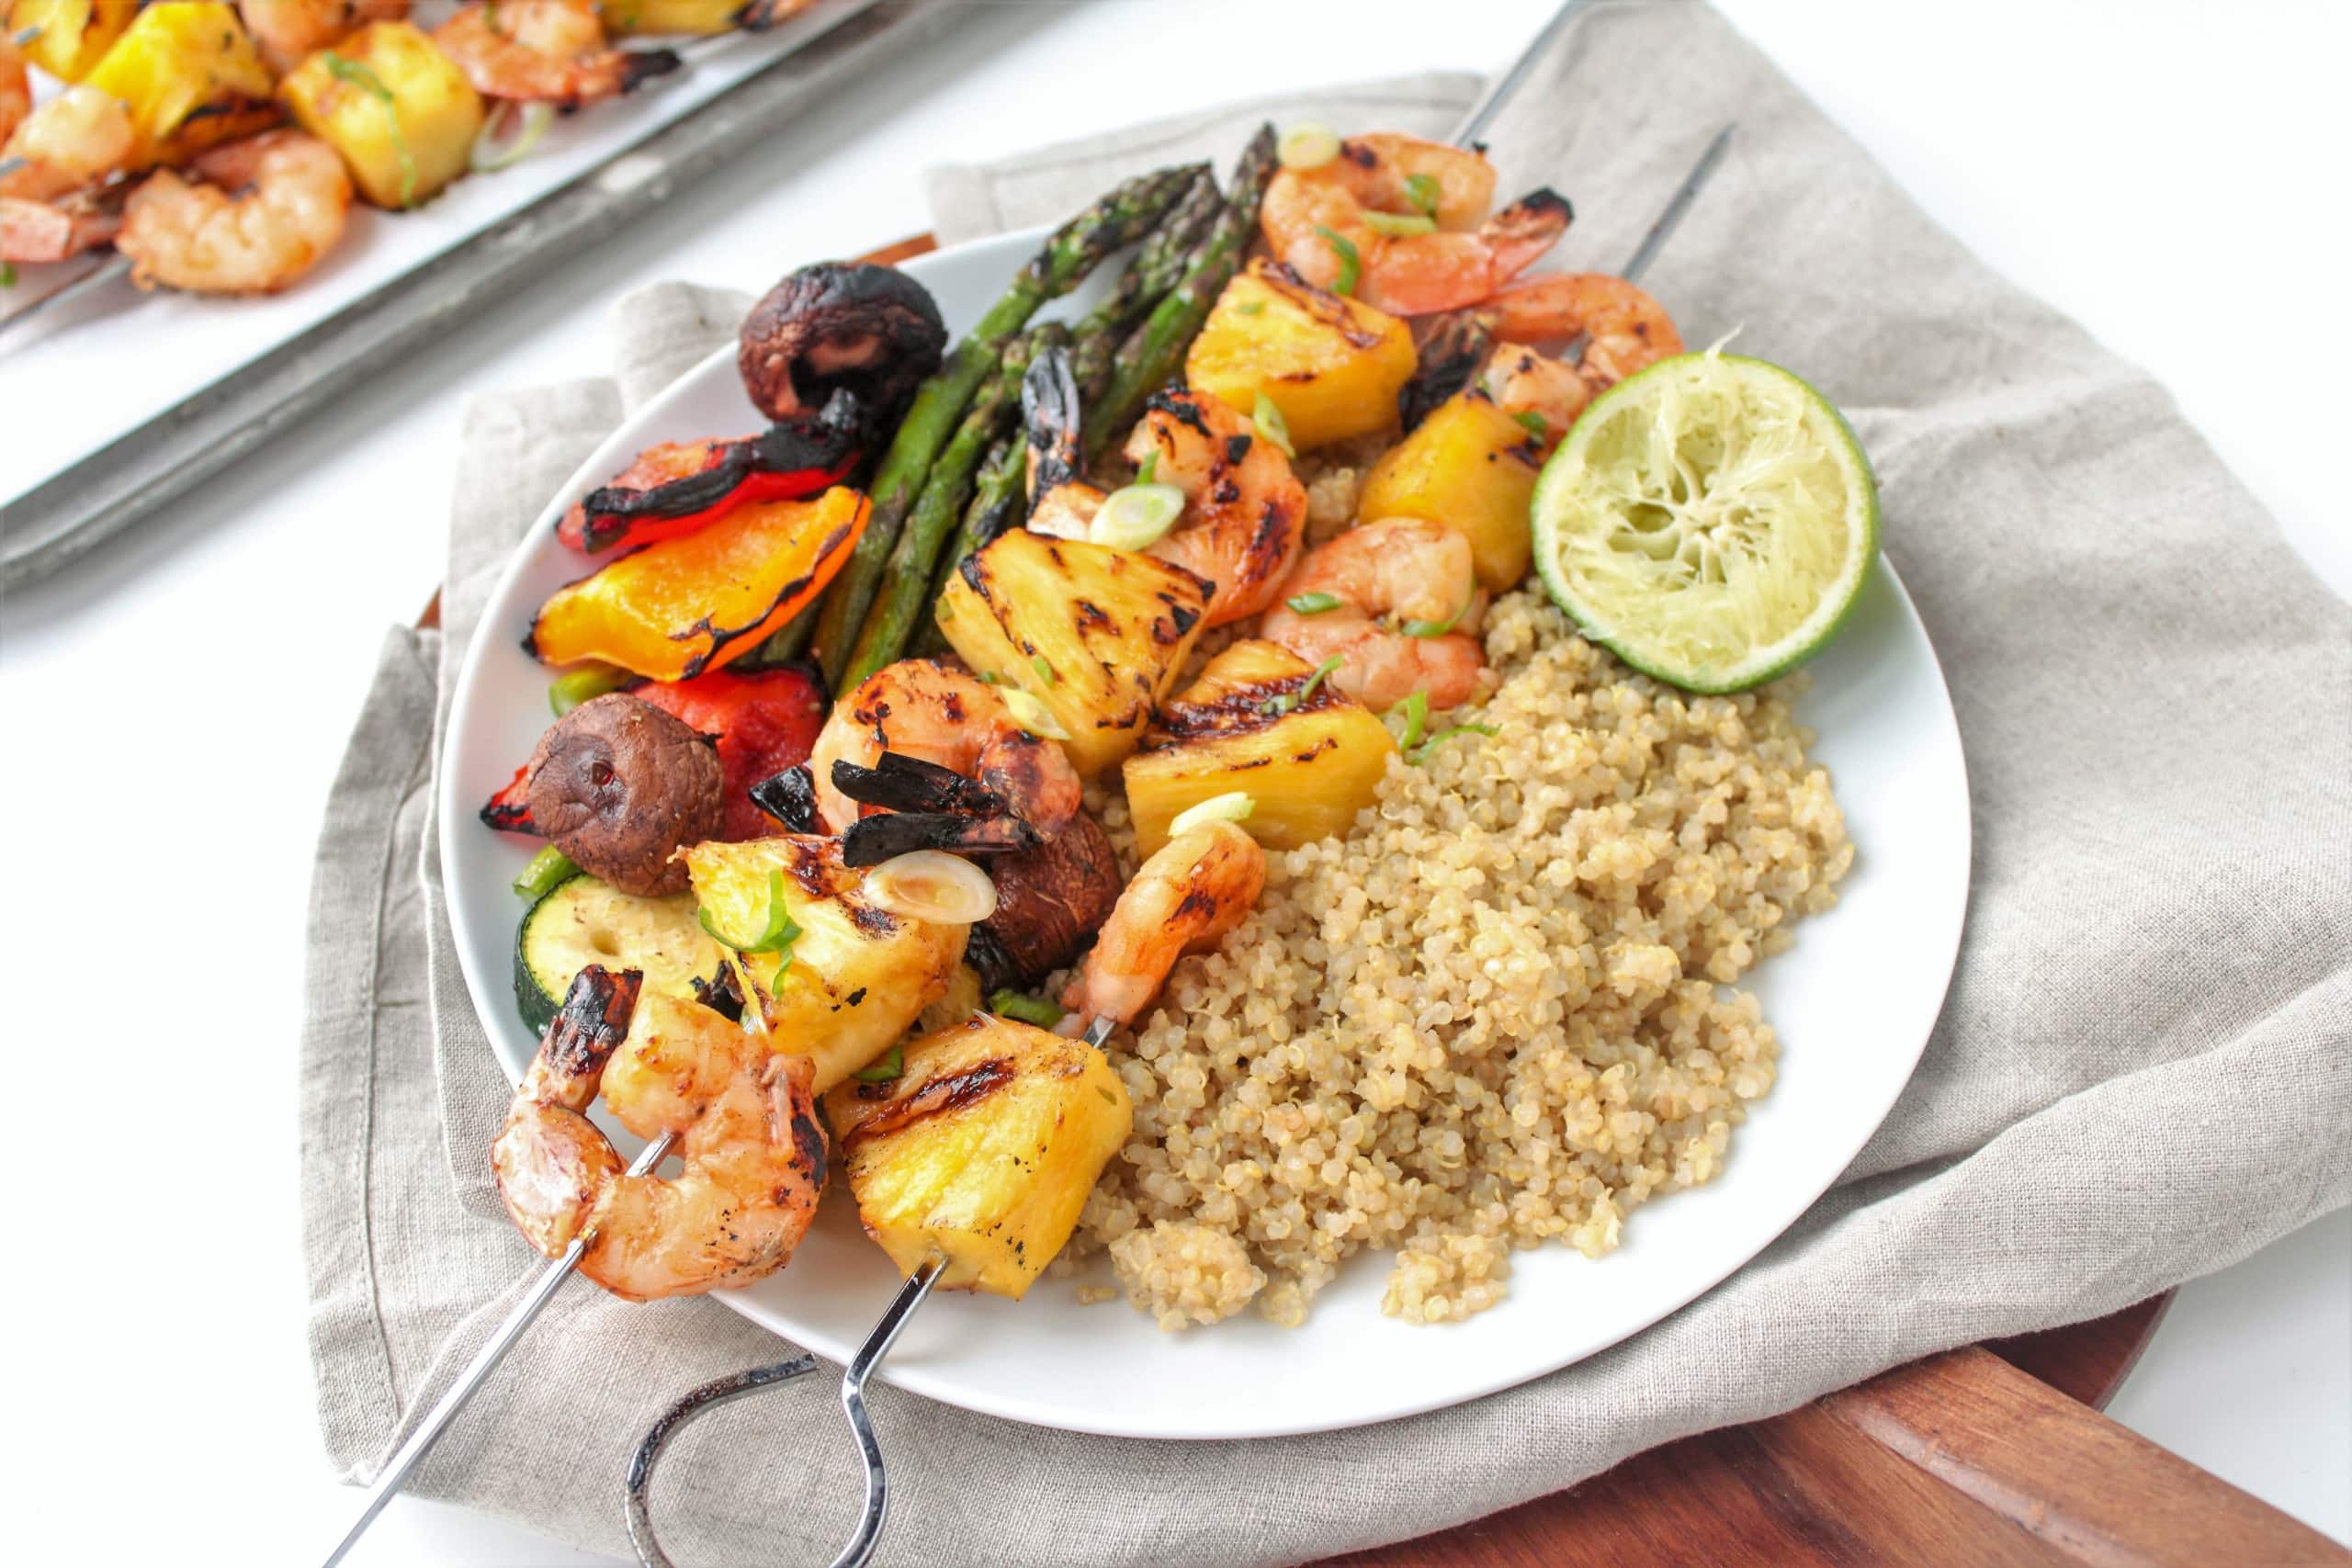 Grilled Shrimp and Pineapple Skewers with Coconut Quinoa